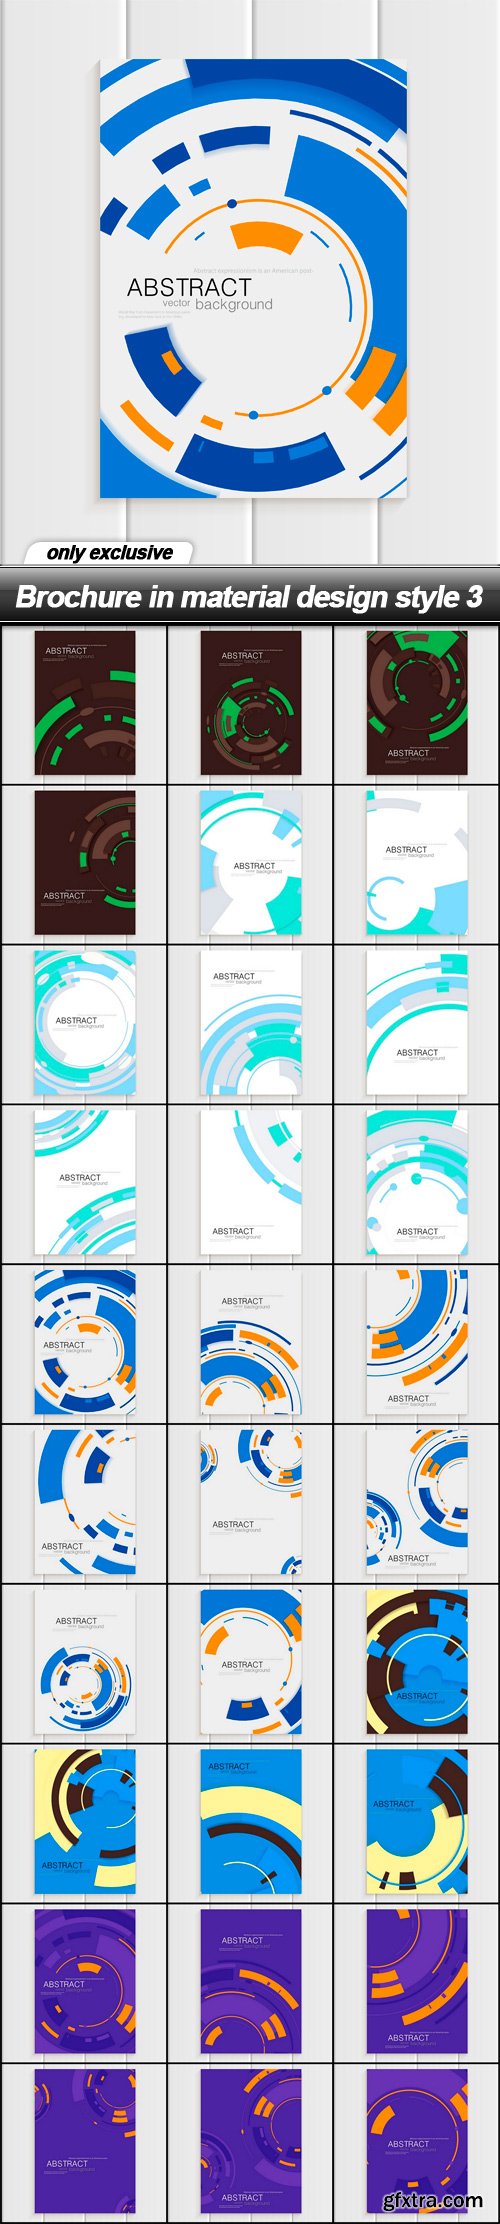 Brochure in material design style 3 - 30 EPS